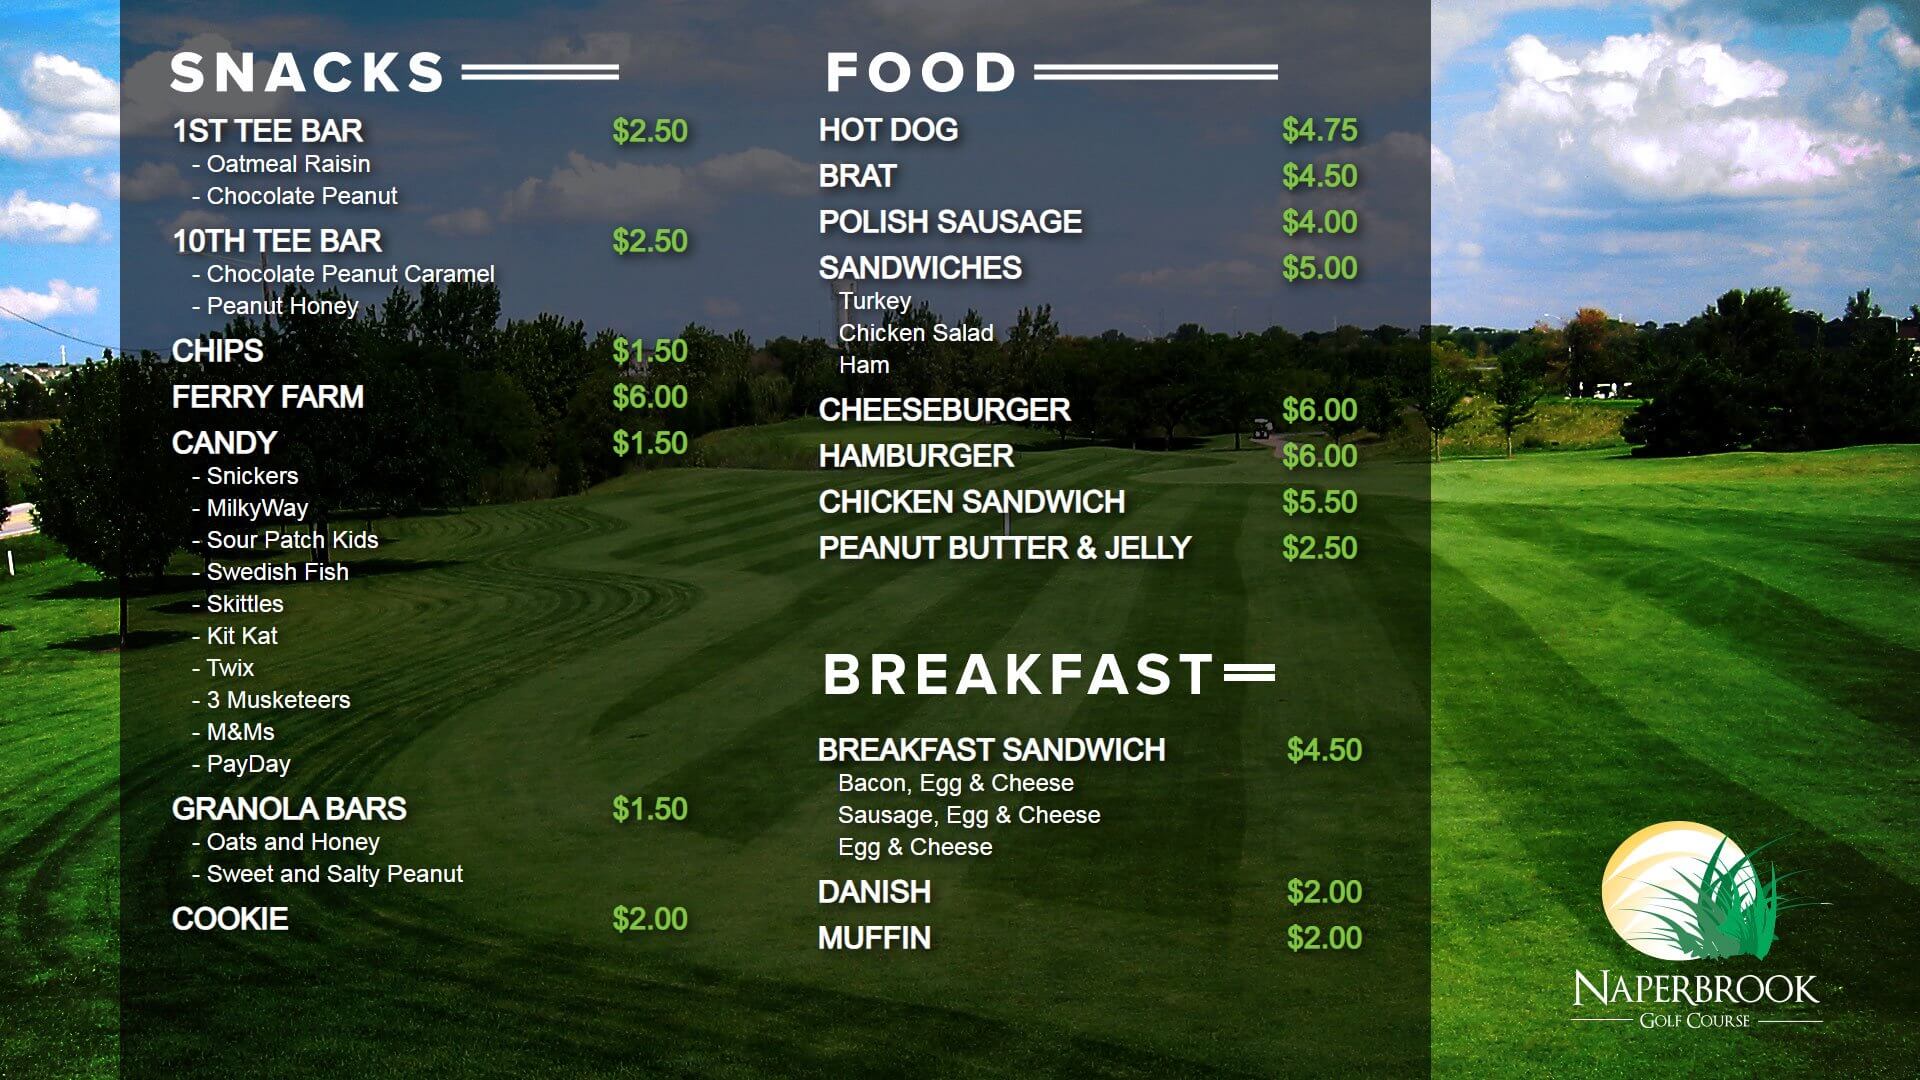 The image shows a digital signage layout for Naperbrook Golf Course displaying a menu of food offered at the course.